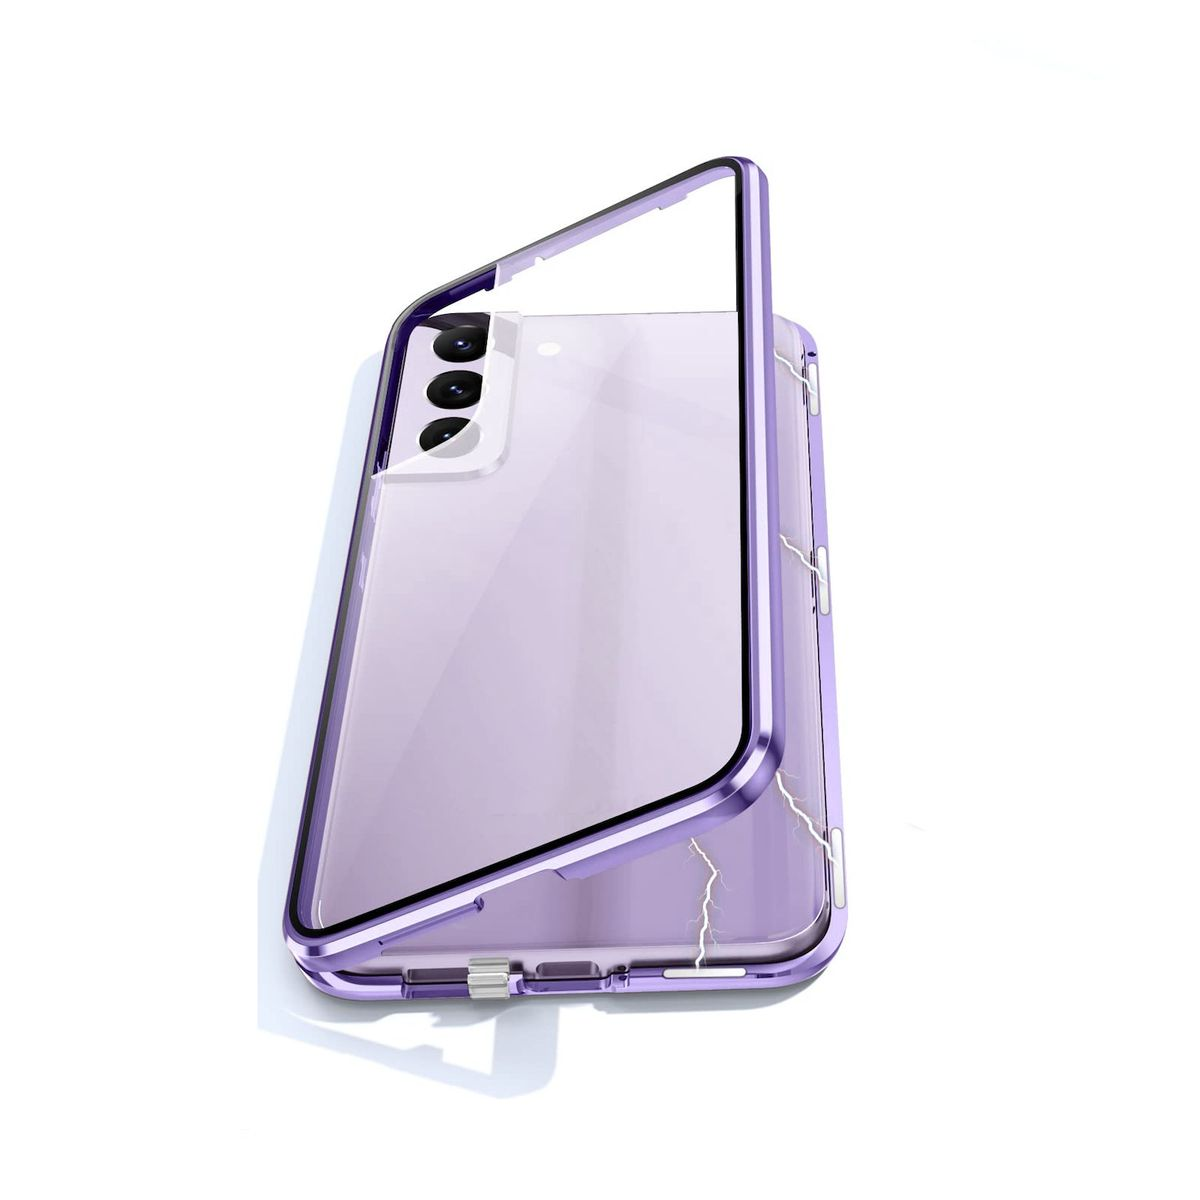 Glas Magnet Lila Beidseitiger S24 Grad / Cover, Transparent Samsung, Full Galaxy Hülle, WIGENTO 360 Plus,